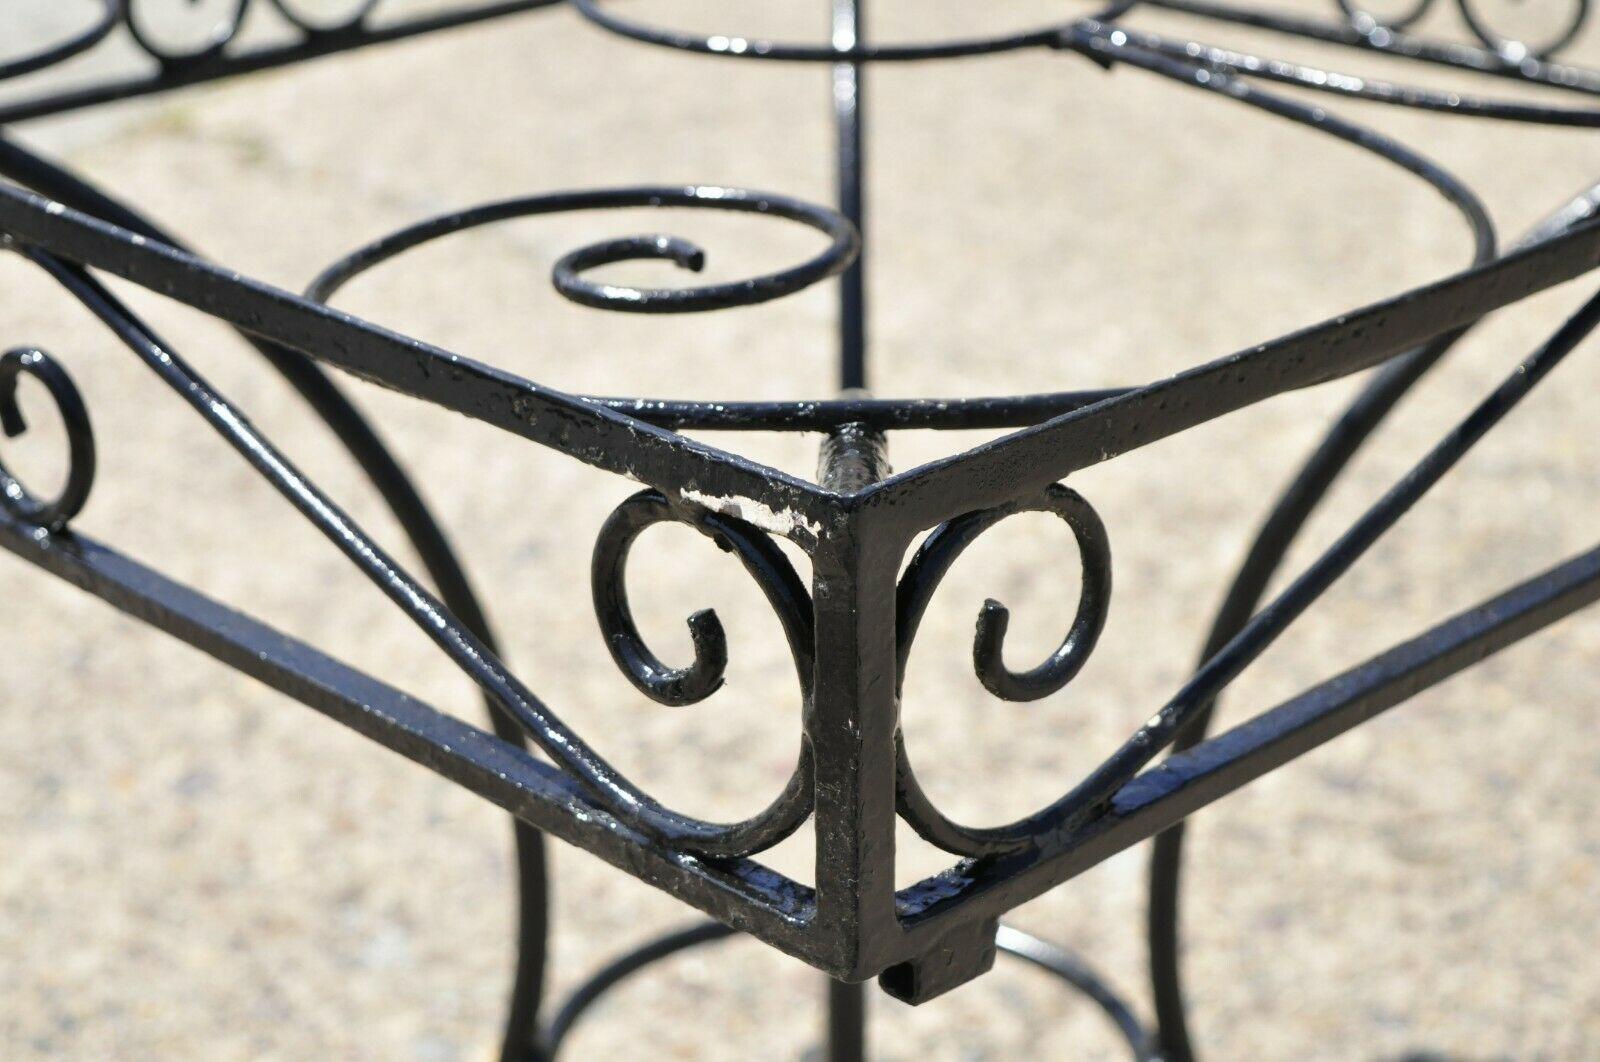 Hollywood Regency Vintage Wrought Iron Garden Patio Dining Set Square Table 4 Chairs - 5 Pc Set